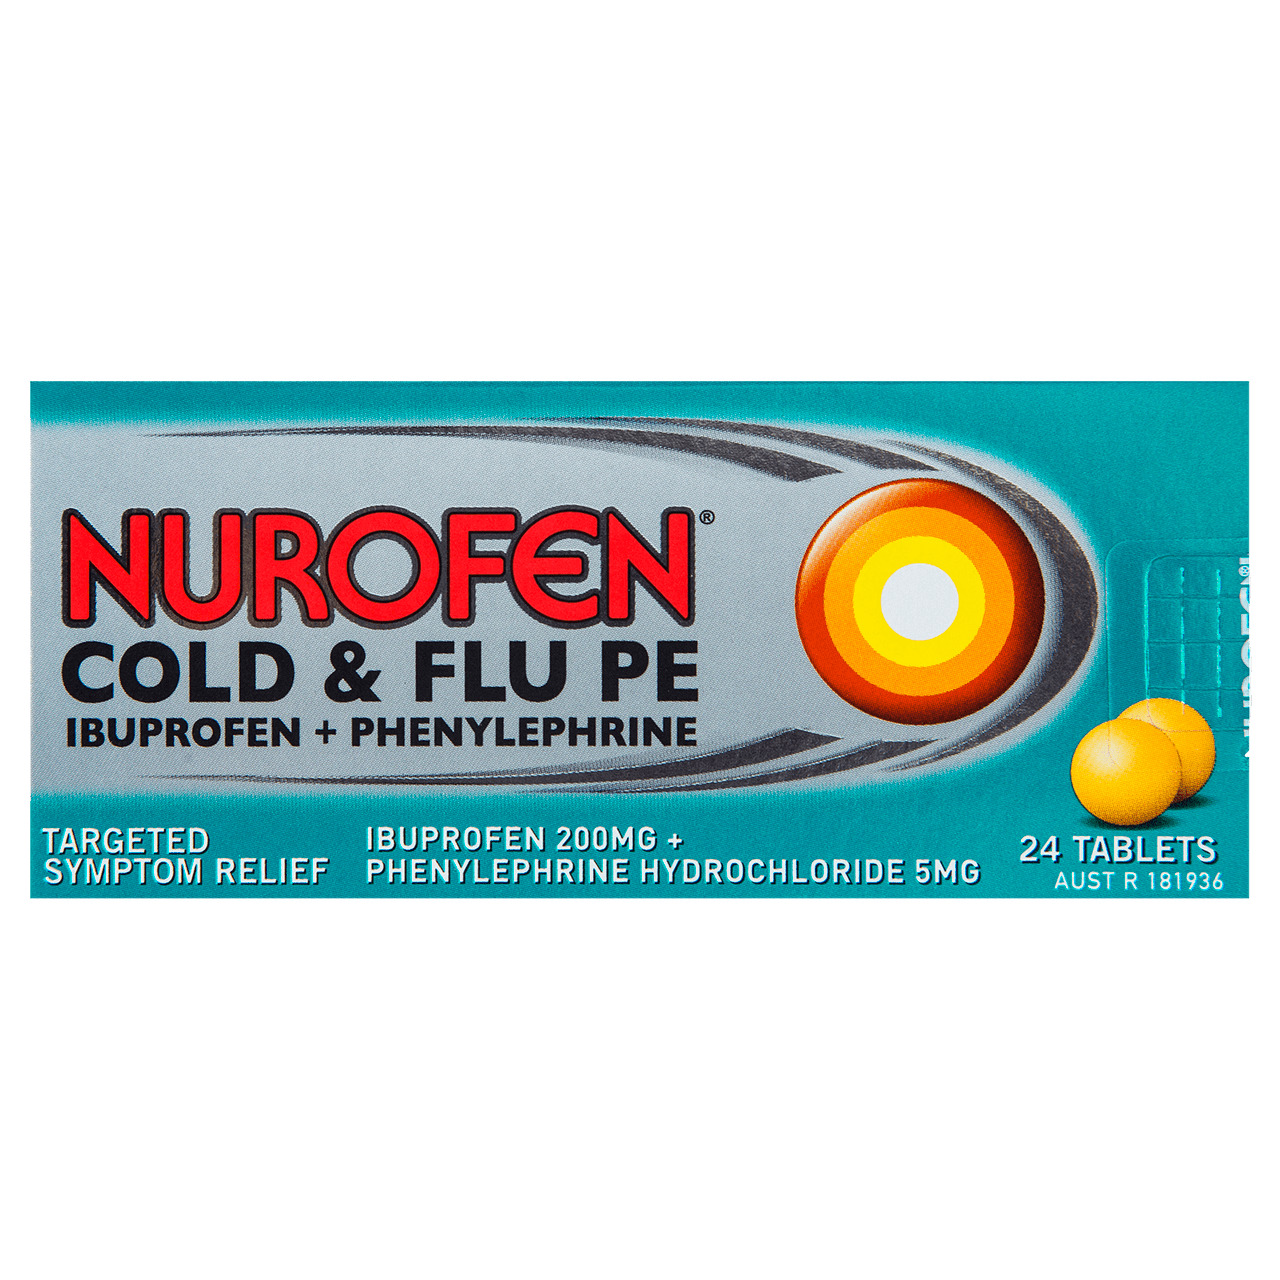 Nurofen Cold and Flu icons